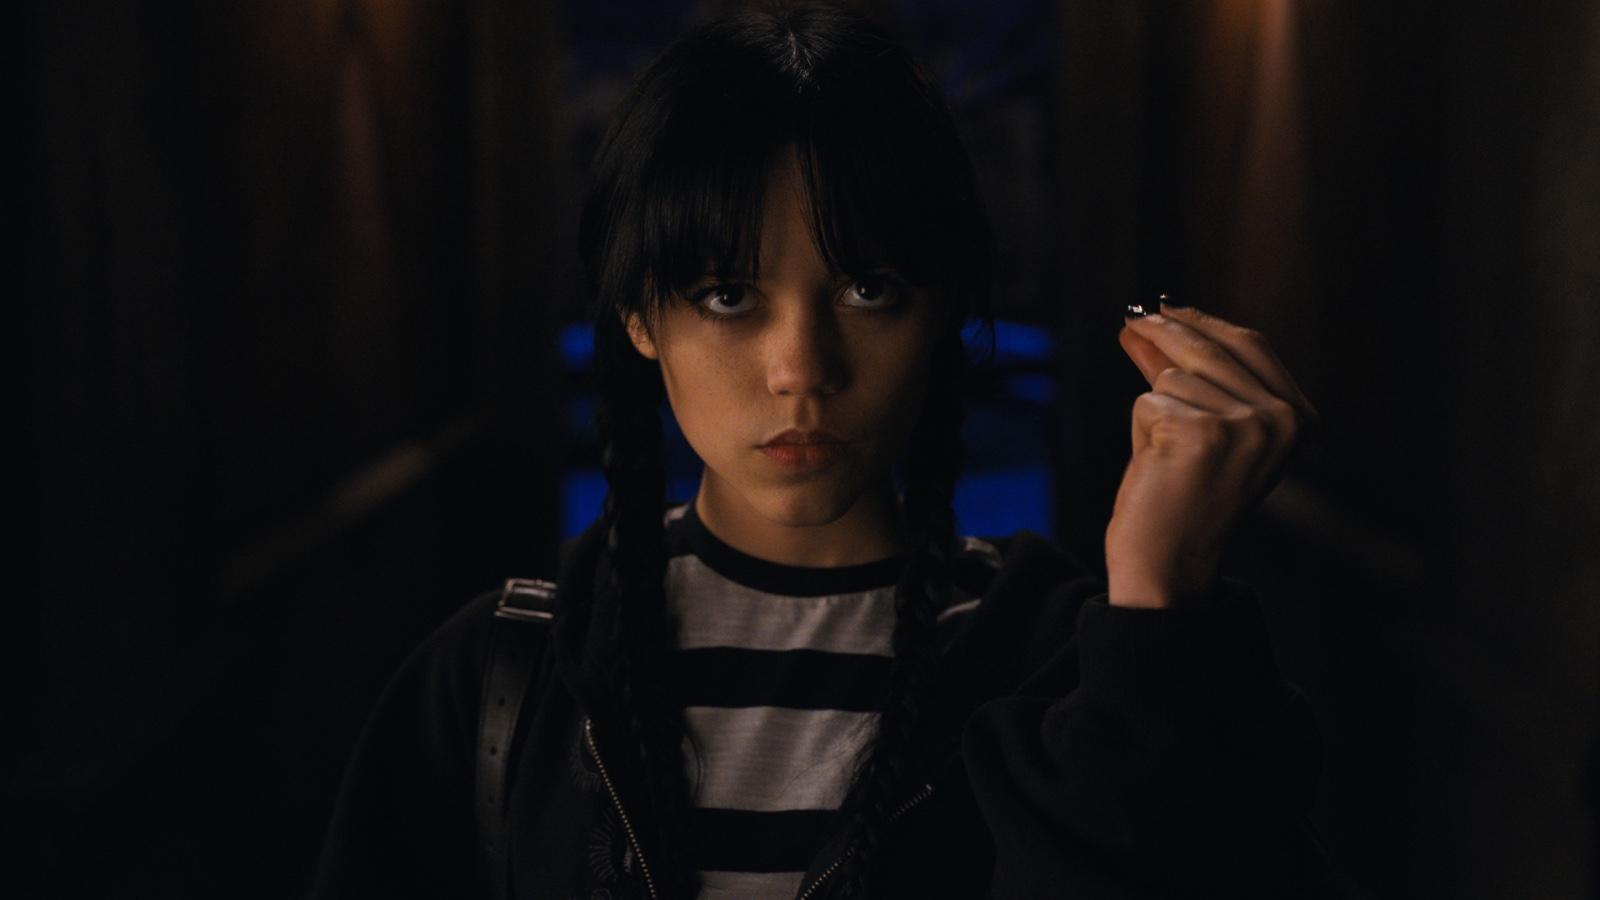 Wednesday Addams on Netflix: Why does she continue to matter